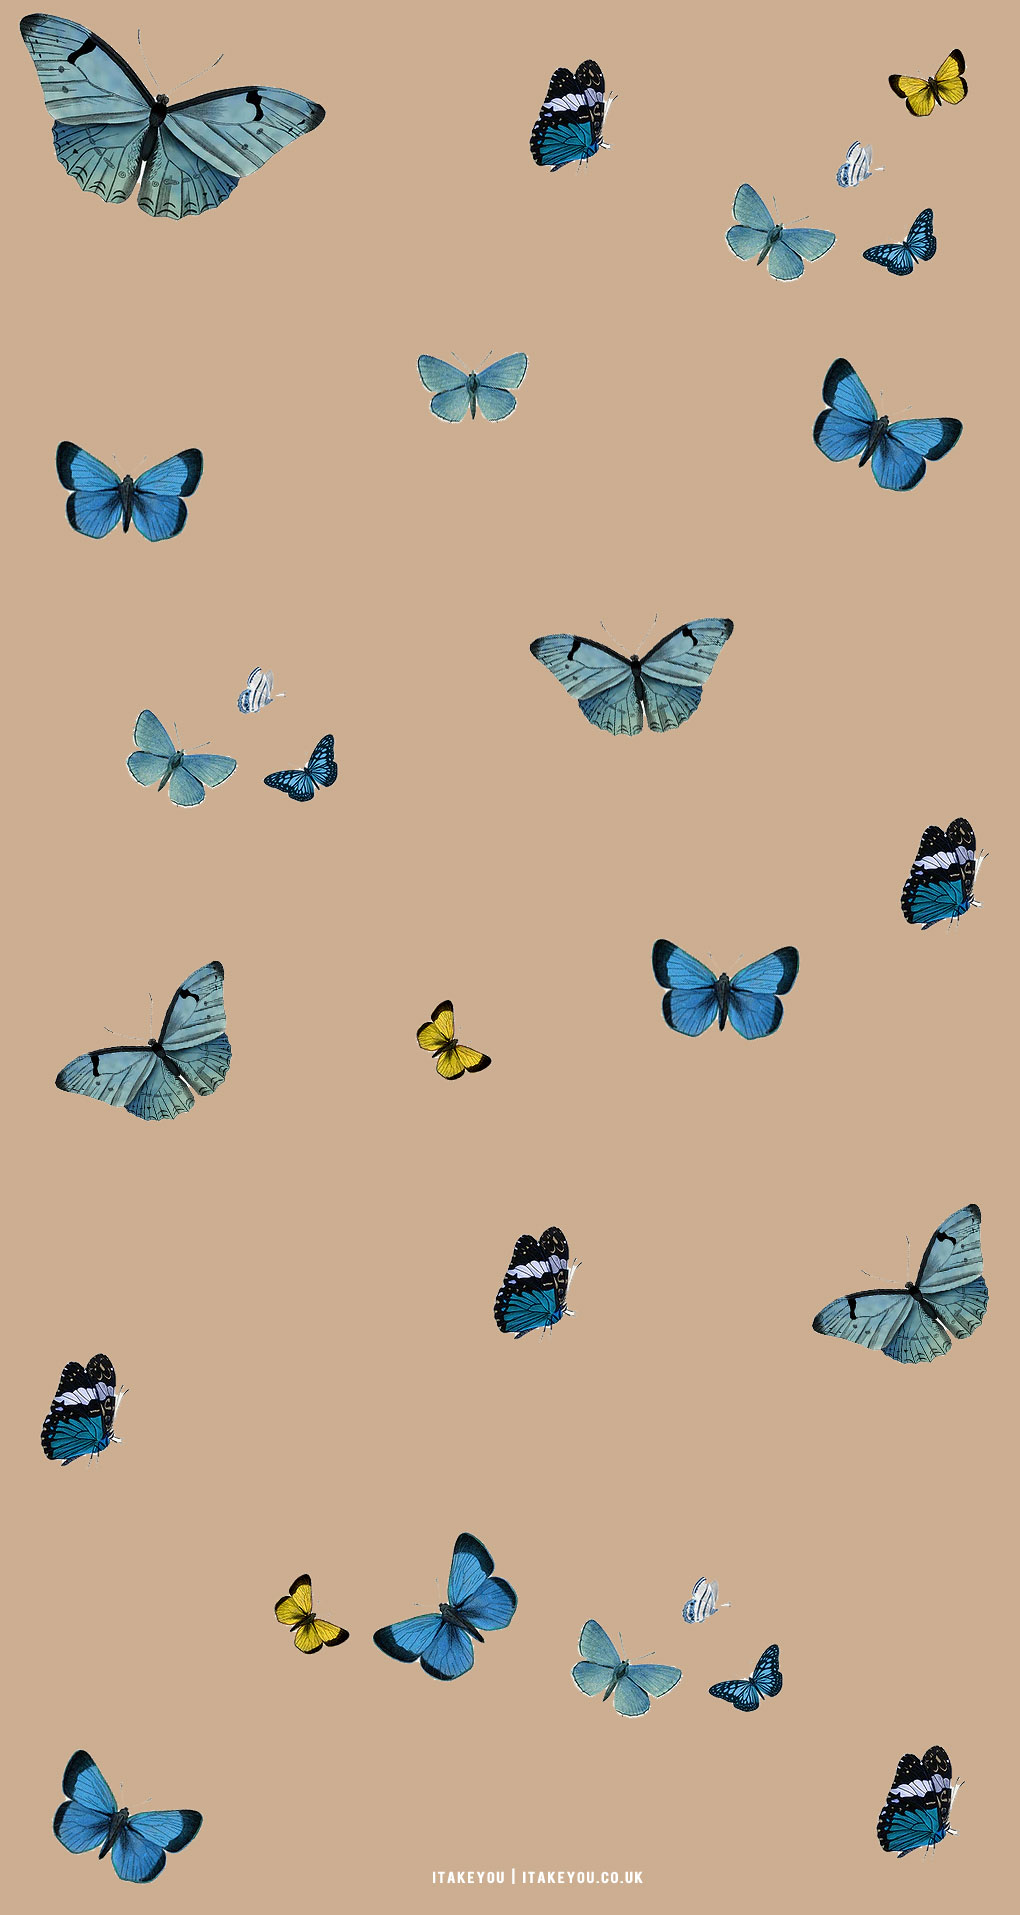 Cute Brown Aesthetic Wallpaper for Phone, Butterfly Assortment I Take You. Wedding Readings. Wedding Ideas